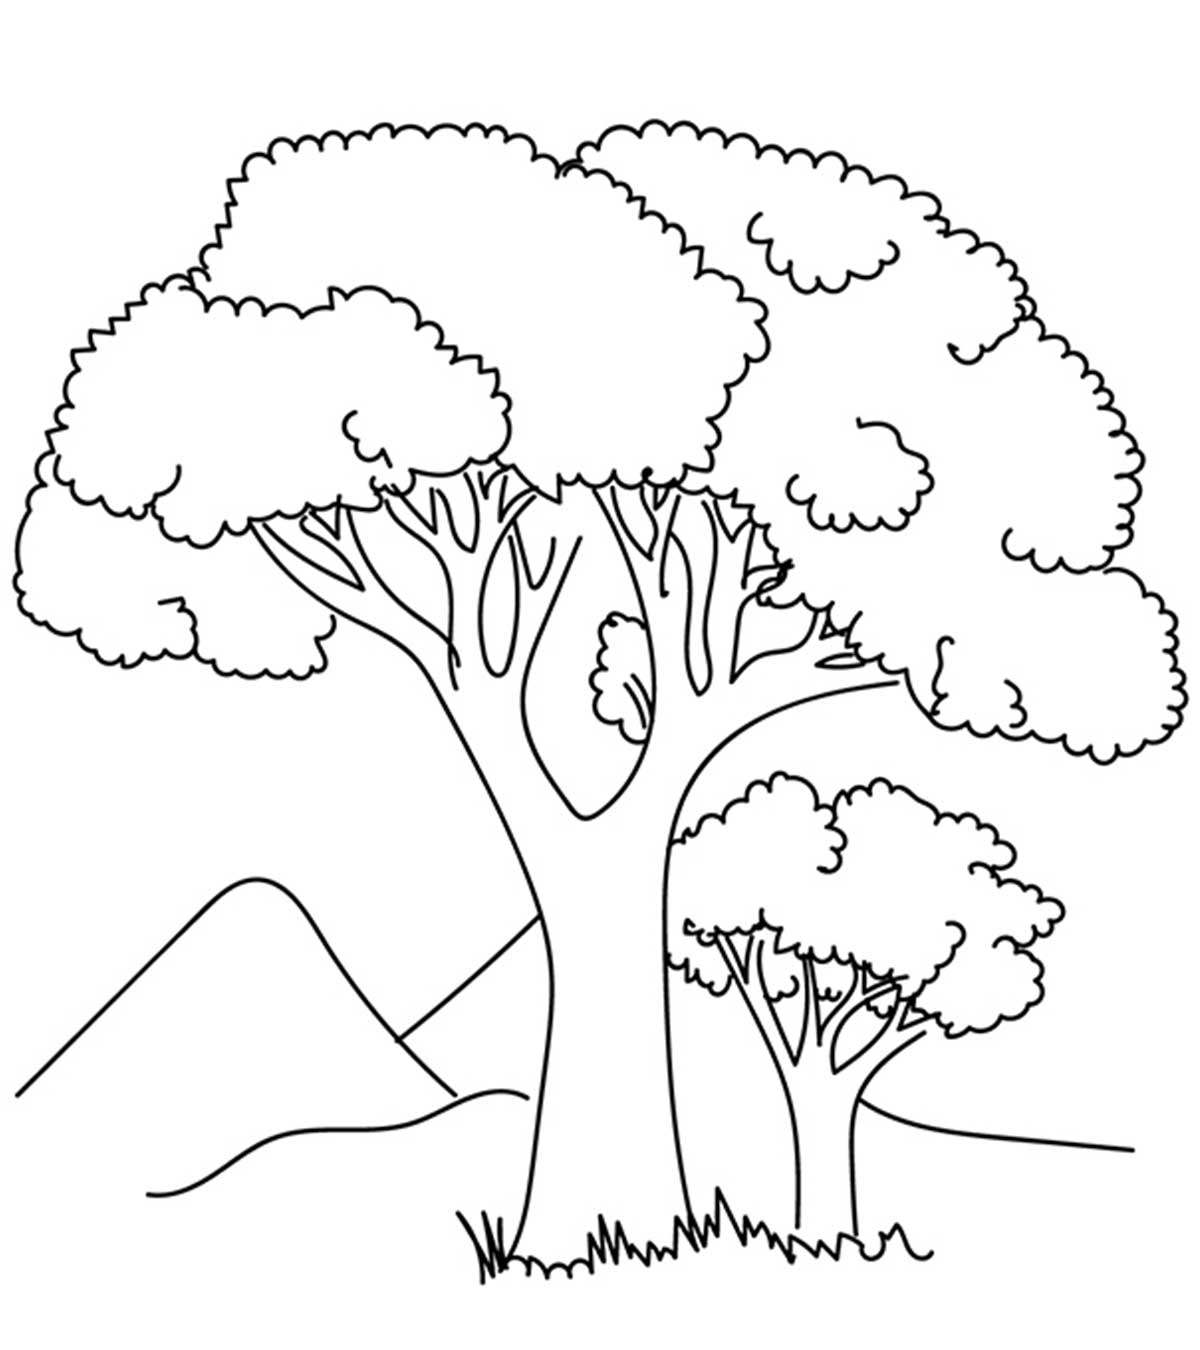 South Park Coloring Page Top 25 Tree Coloring Pages For Your Little Ones